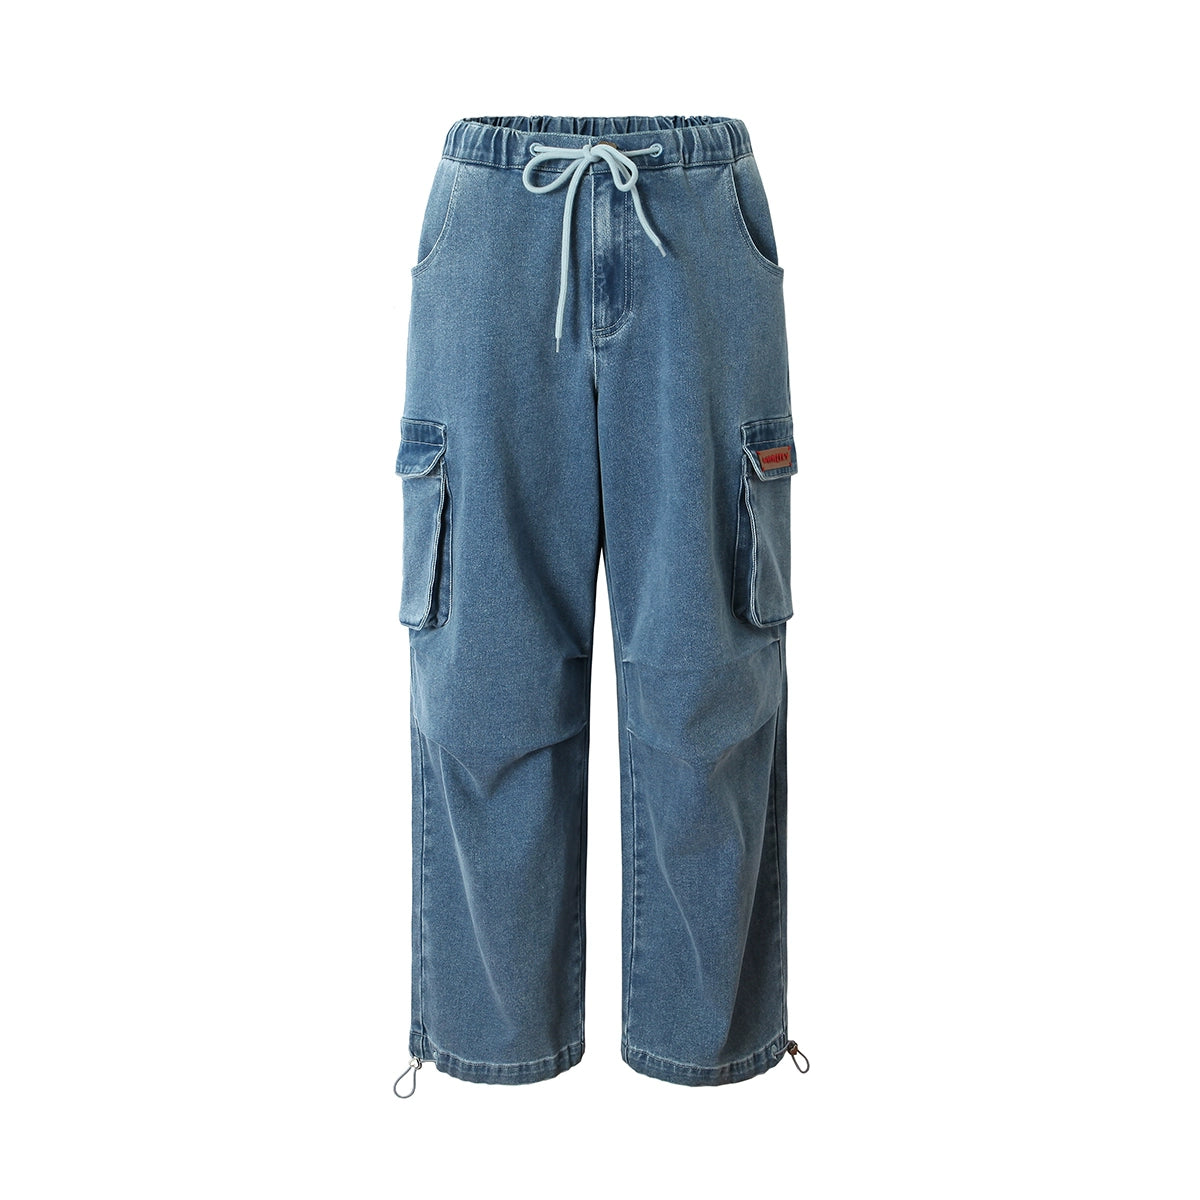 American Style Casual Jeans Pants